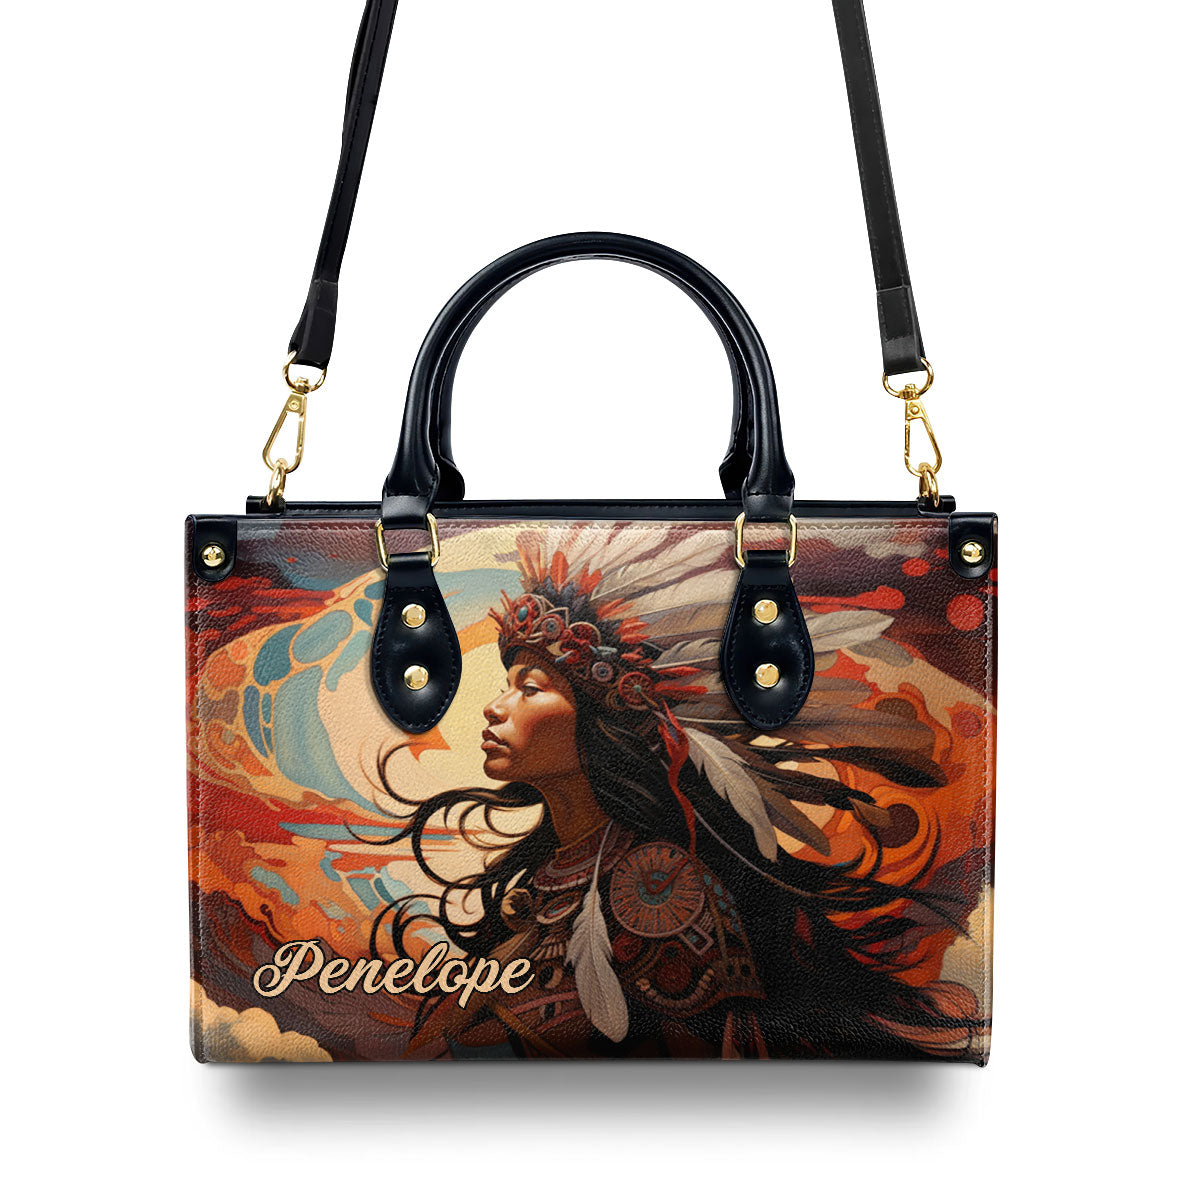 Native American Girl - Personalized Leather Handbag MS114